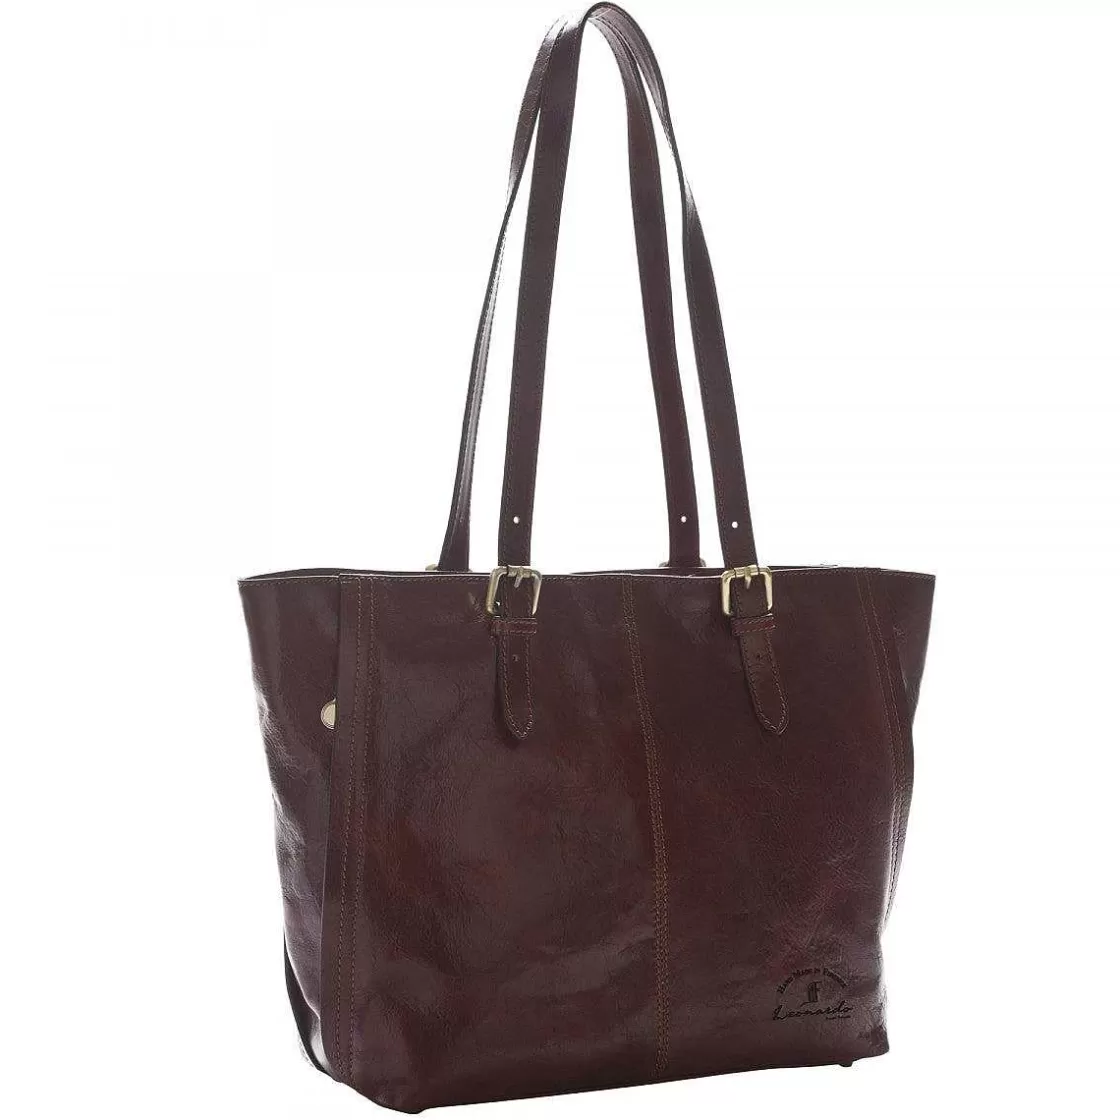 Leonardo Classic Shopping Bag In Full-Grain Leather With Zip, Three Compartments And Side Pockets Store